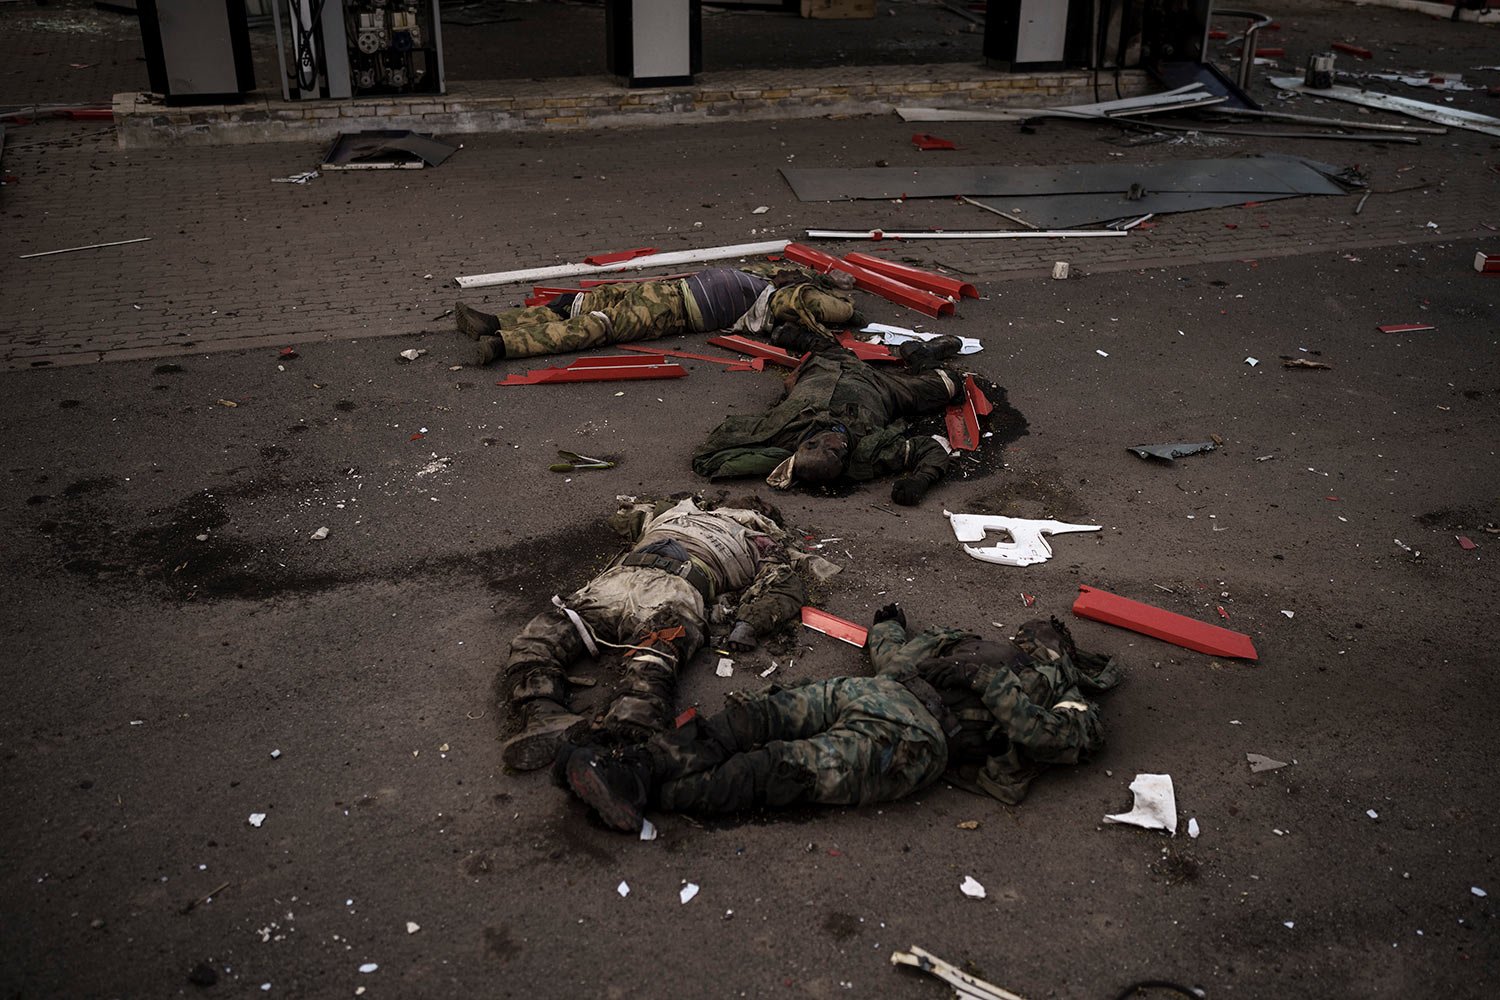  The bodies of unidentified men, believed to be Russian soldiers, arranged in a Z, a symbol of the Russian invasion, lie near a village recently retaken by Ukrainian forces on the outskirts of Kharkiv, Ukraine, Monday, May 2, 2022. (AP Photo/Felipe D